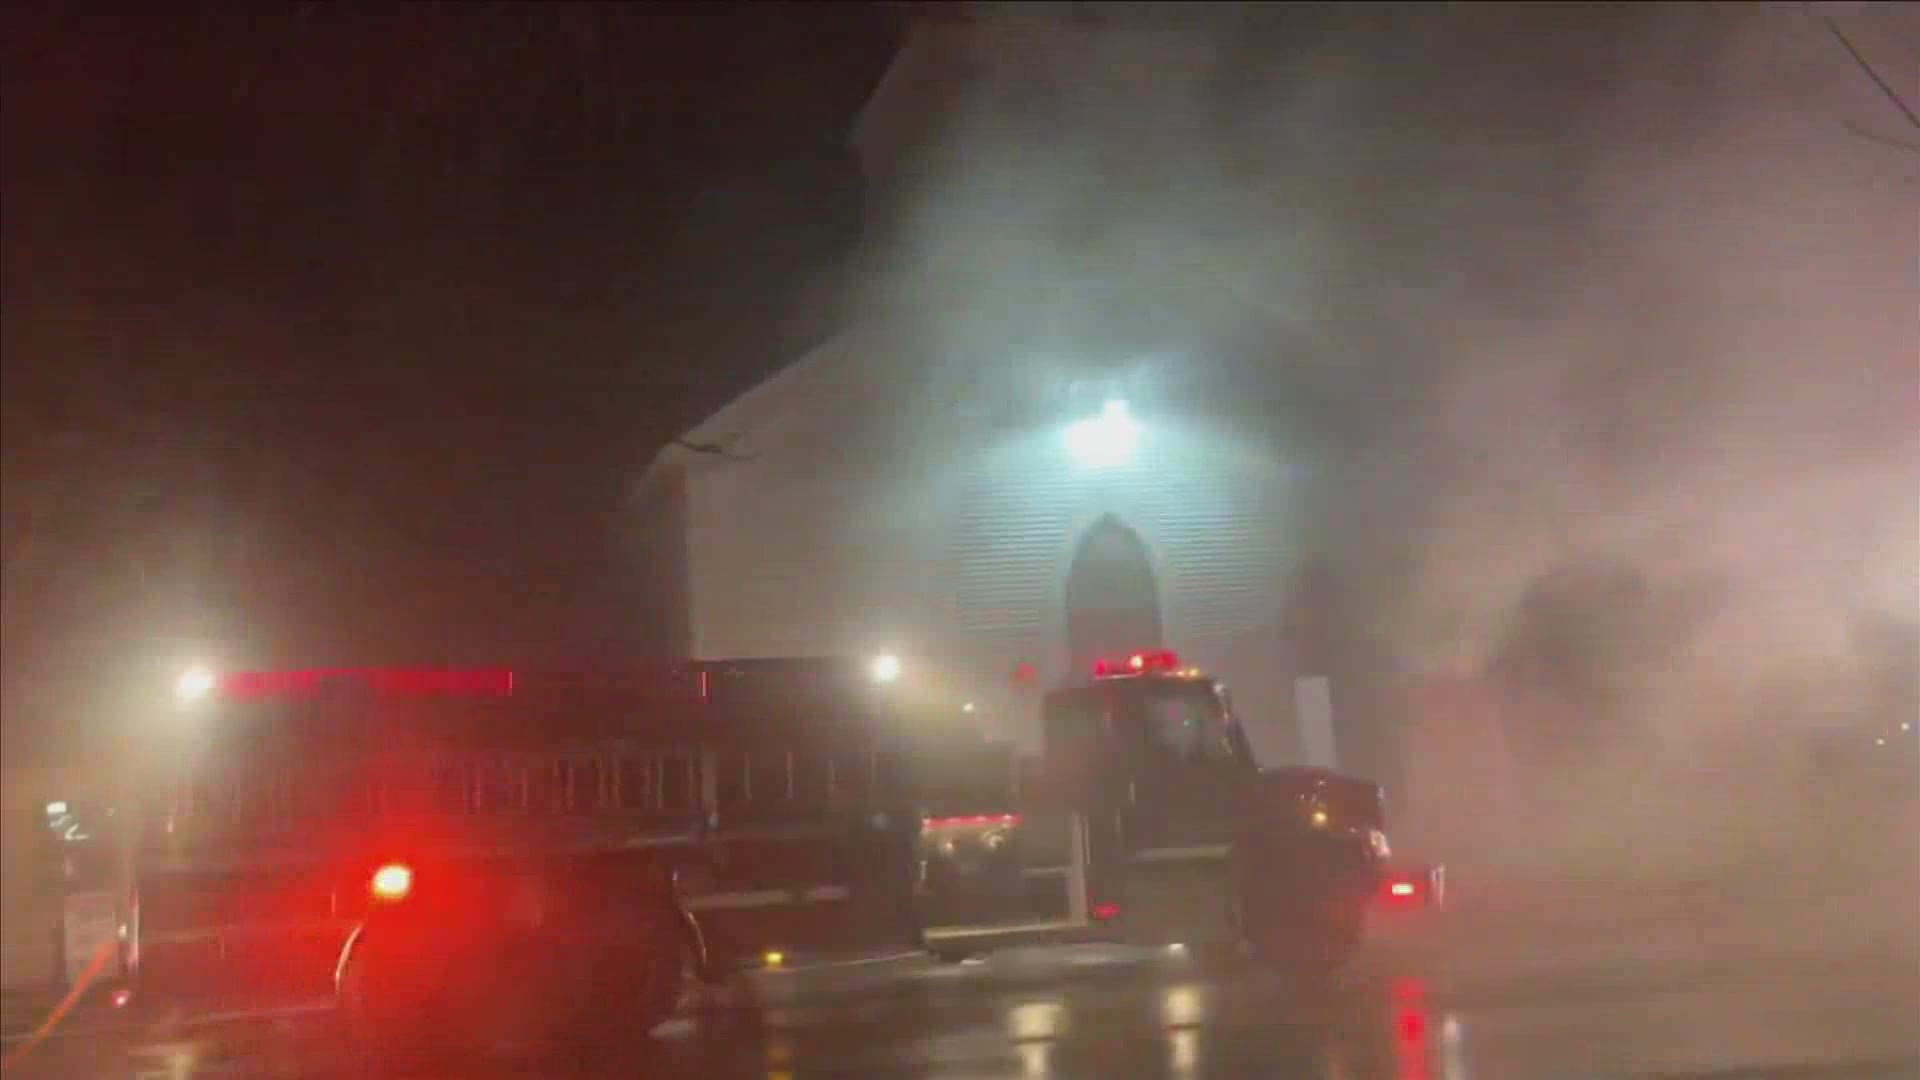 Firefighters battled a three-alarm fire at a church in unity.